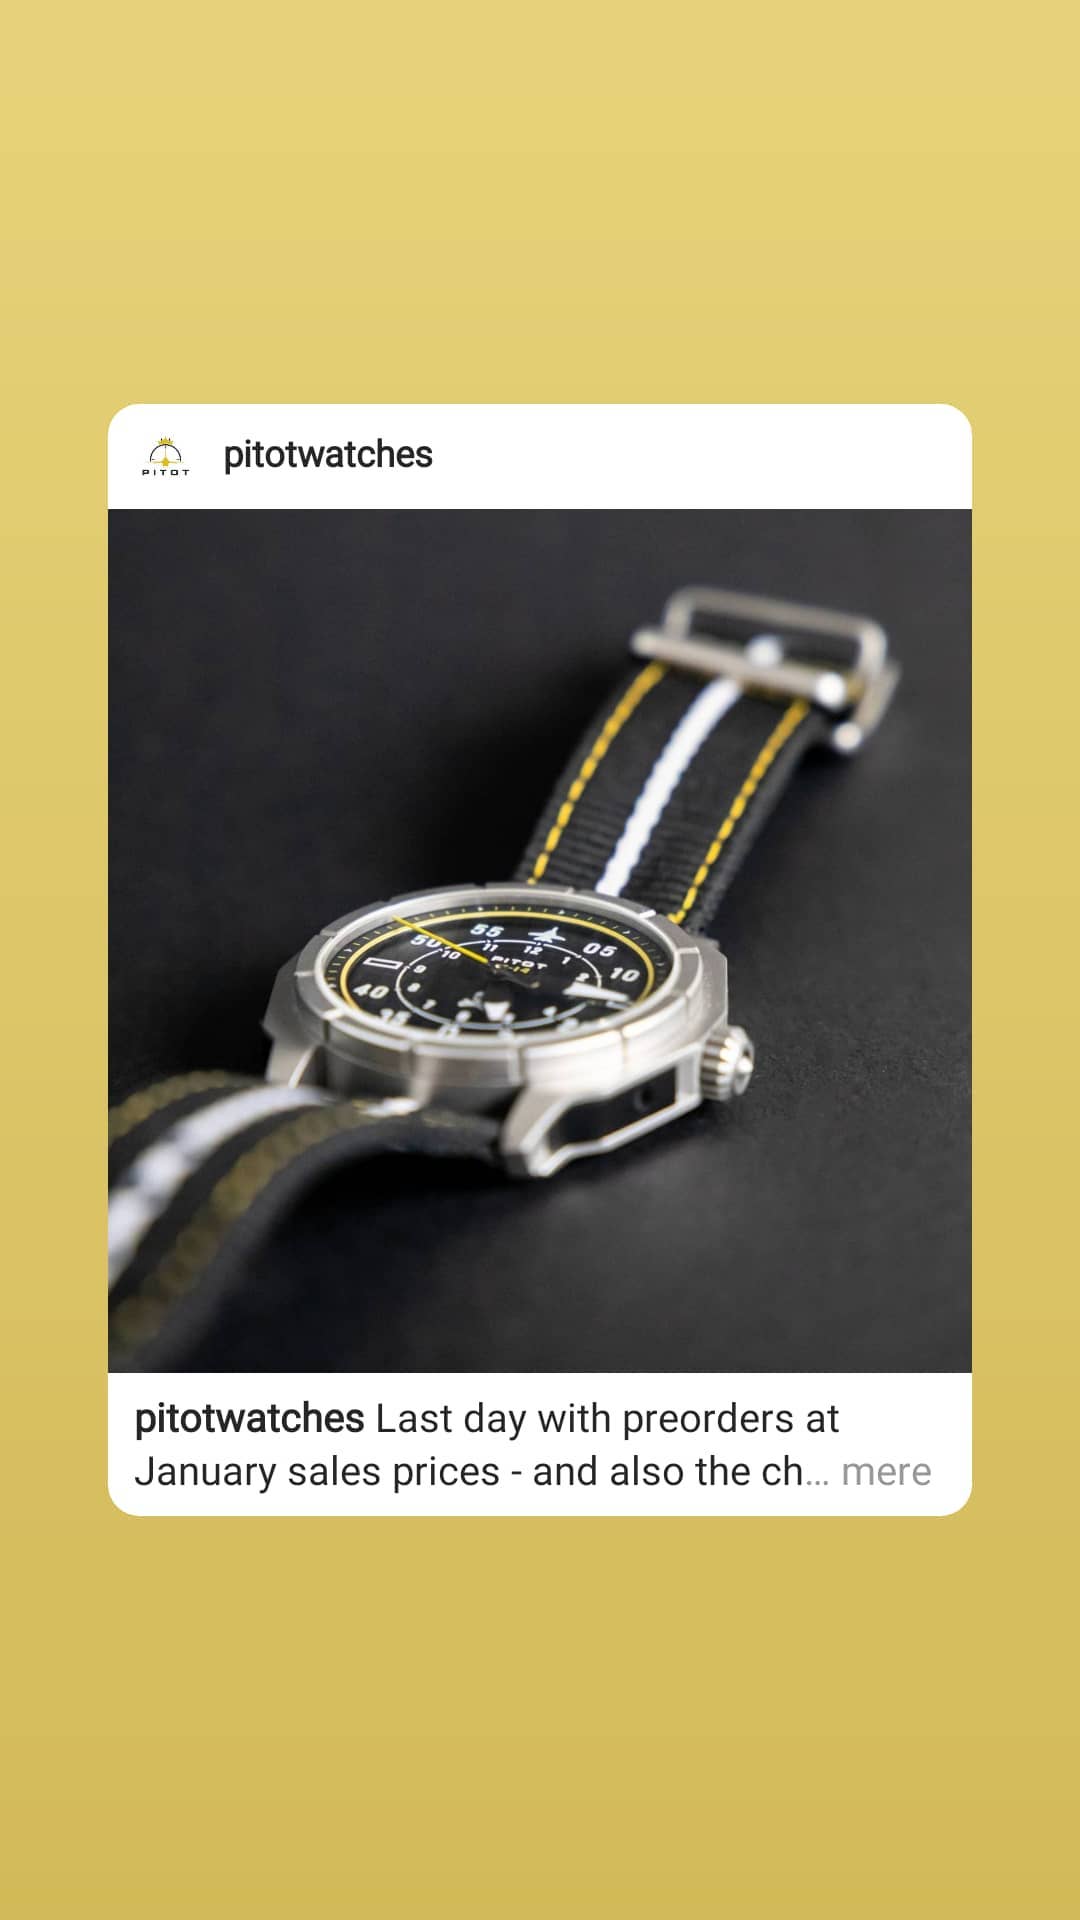 Ritot – the first projection watch. – SlaviaNews